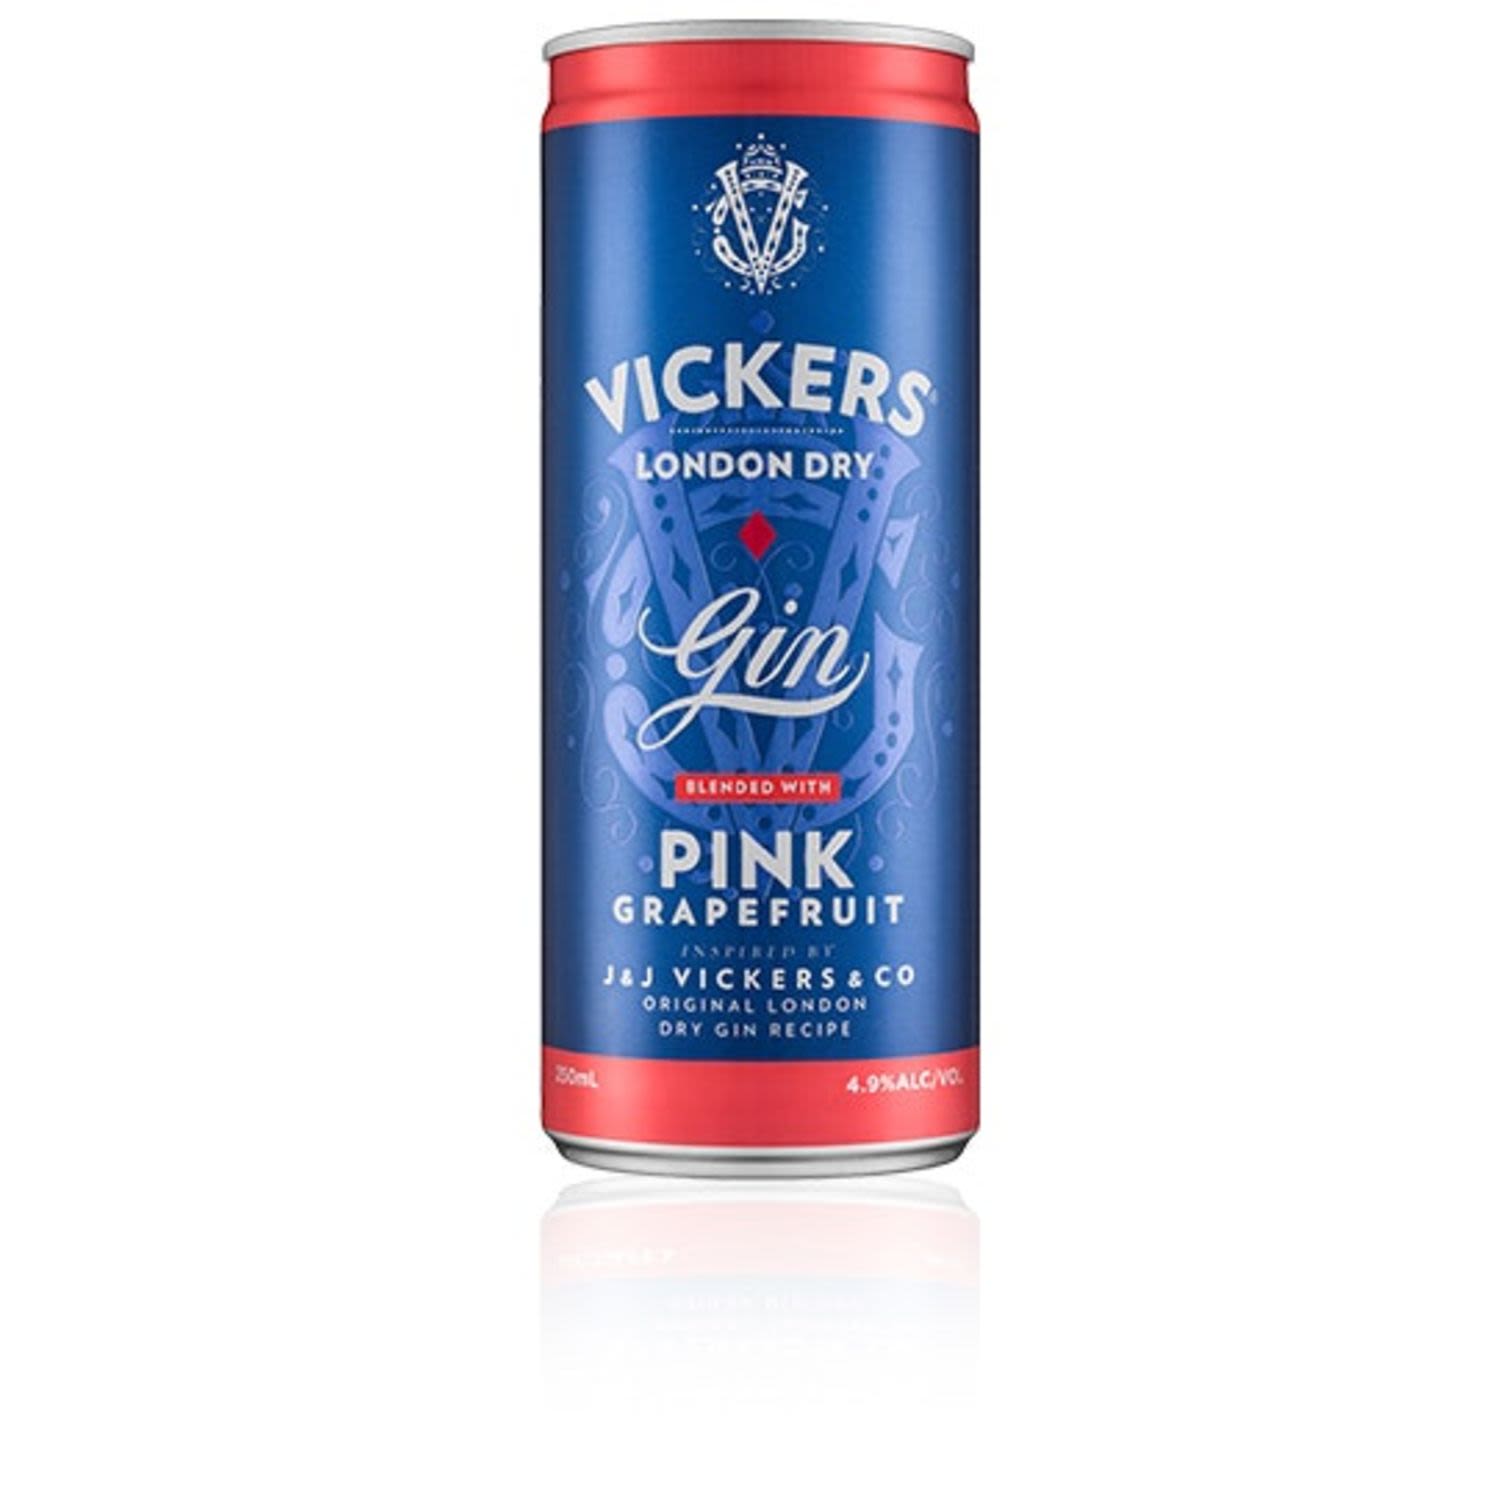 Vickers London Dry Gin distilled to crystal clarity and blended with zesty pink grapefruit and soda water.<br /> <br />Alcohol Volume: 4.90%<br /><br />Pack Format: Can<br /><br />Standard Drinks: 1</br /><br />Pack Type: Can<br />